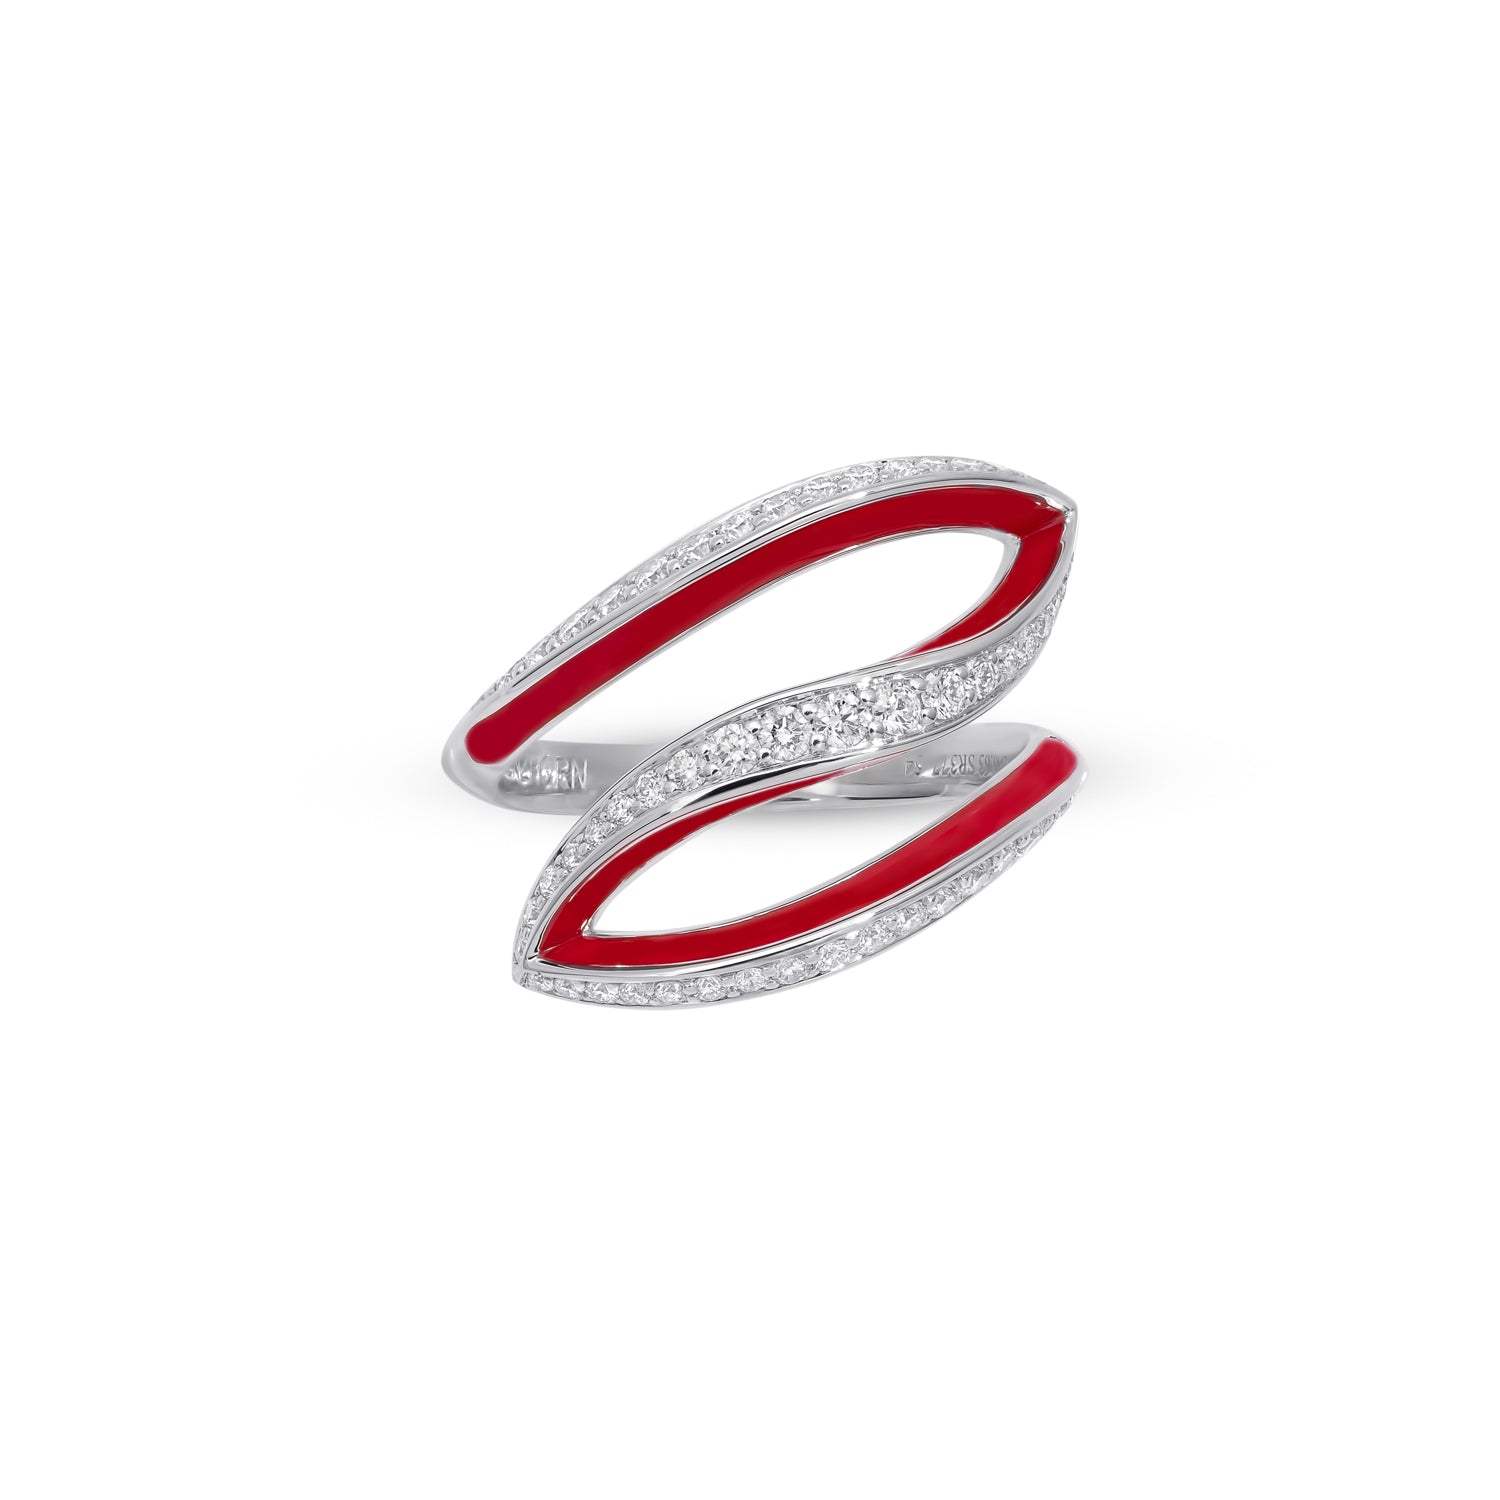 VIVA small Curved Ring with Diamonds and Red Enamel